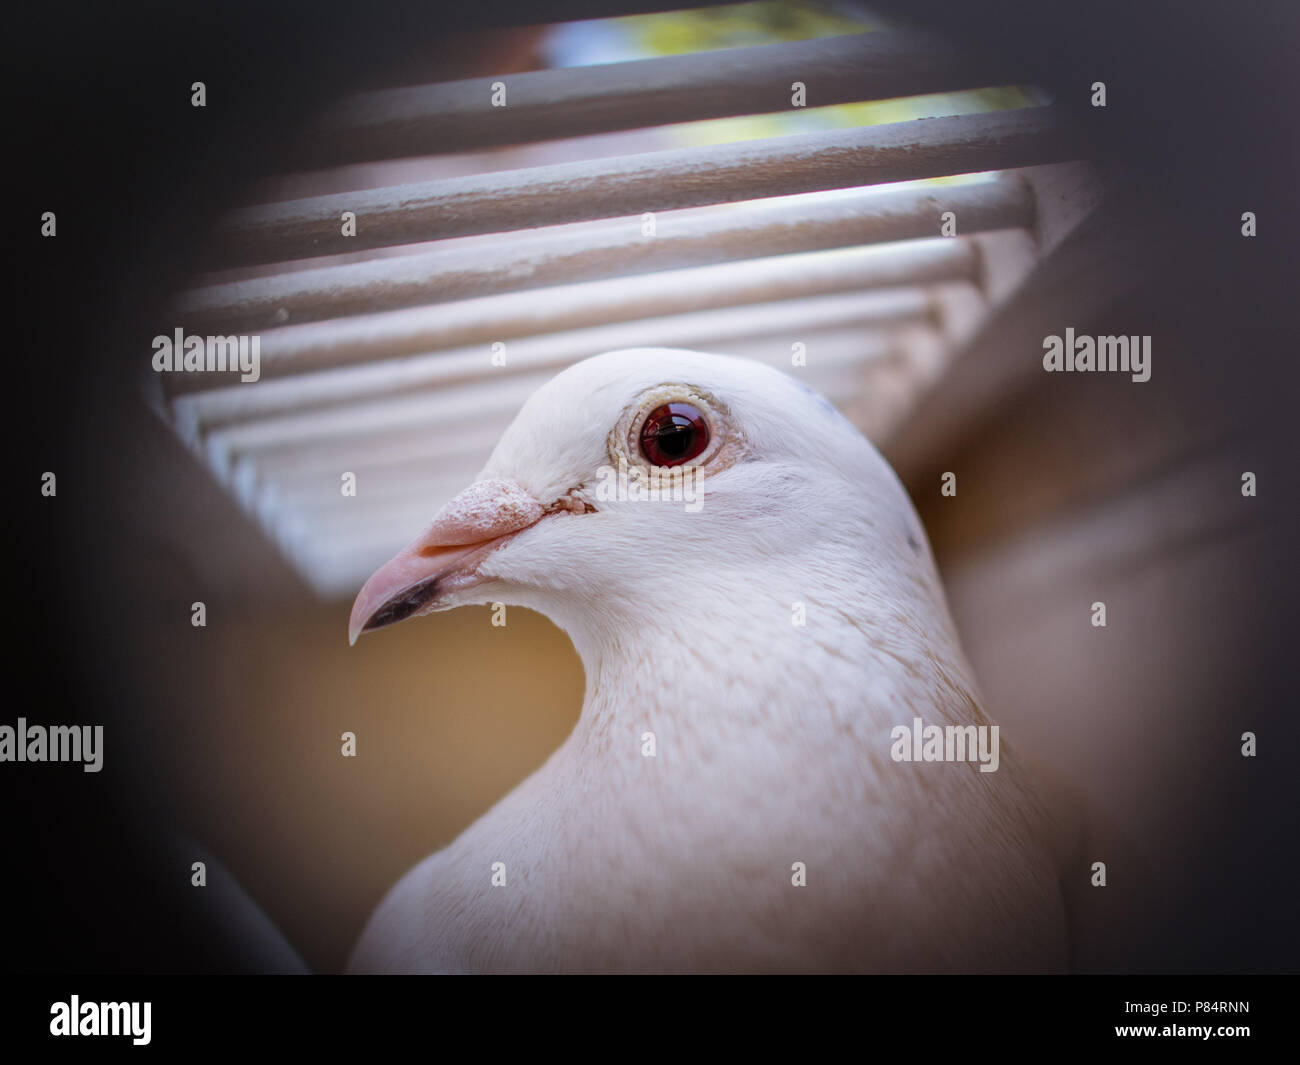 Beautiful White pigeons in cage, doves for wedding in captivity, close up, bird view, cage fence in focus Stock Photo